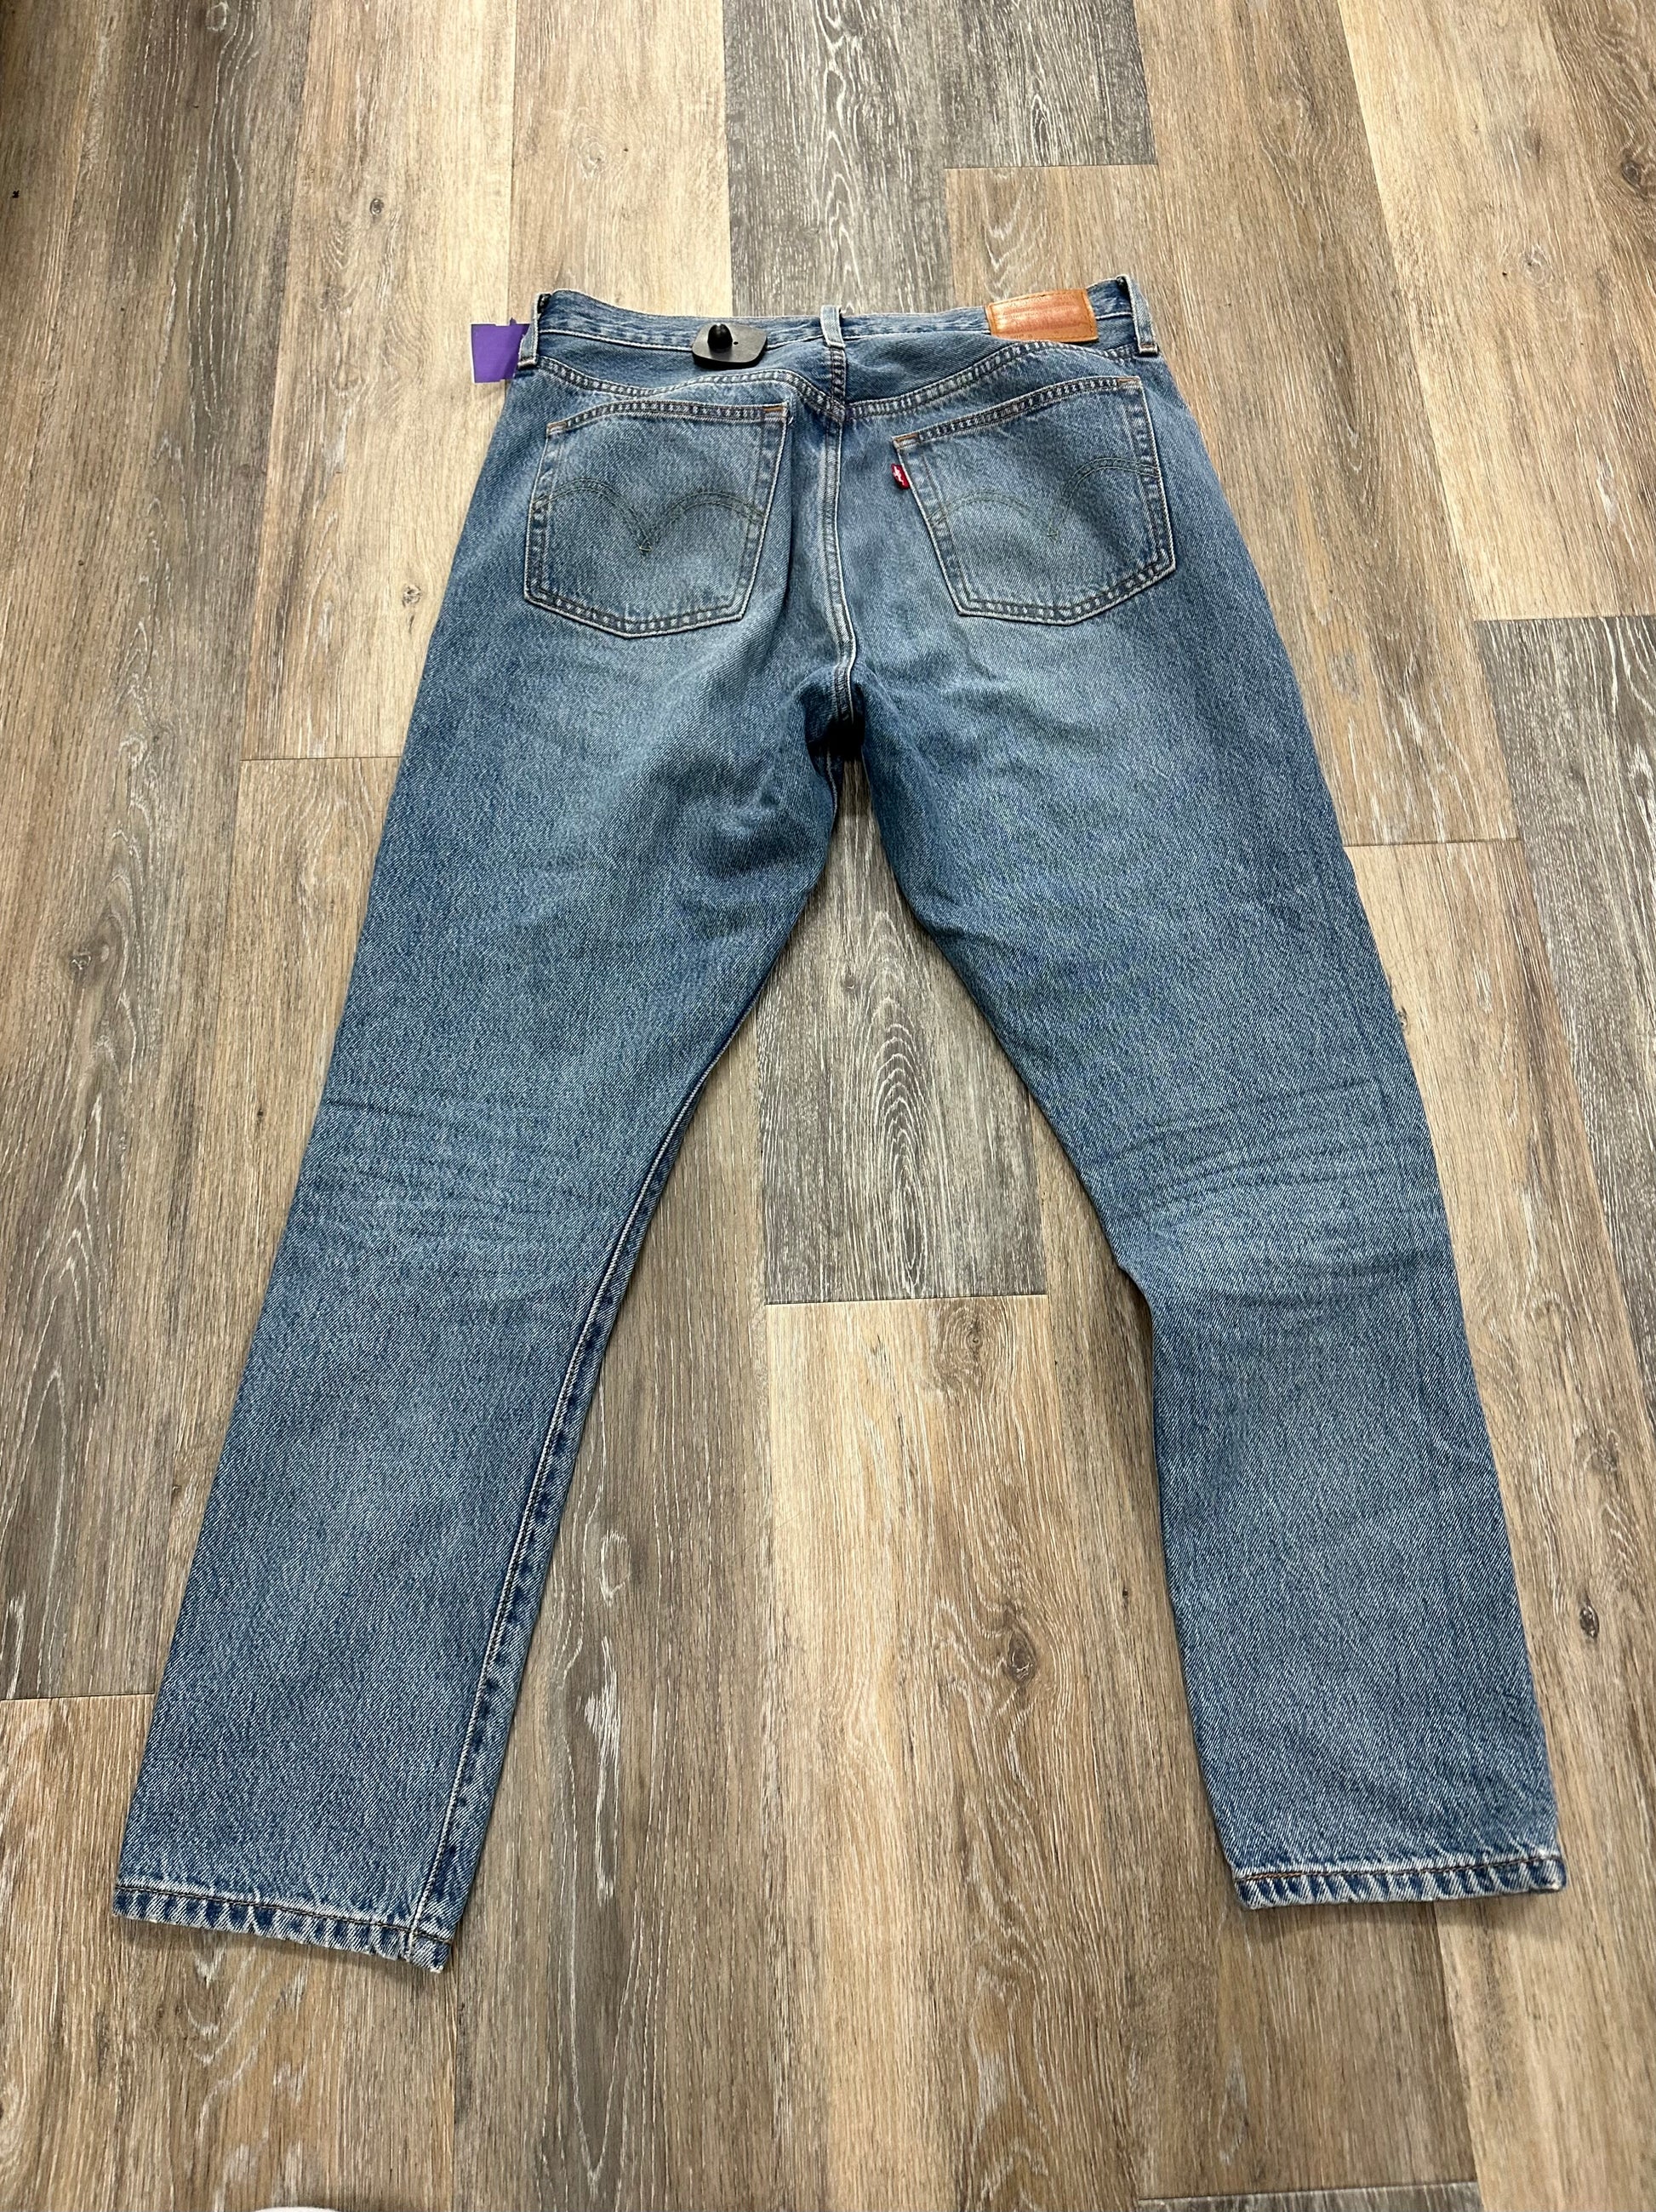 Jeans Straight By Levis Size: 14